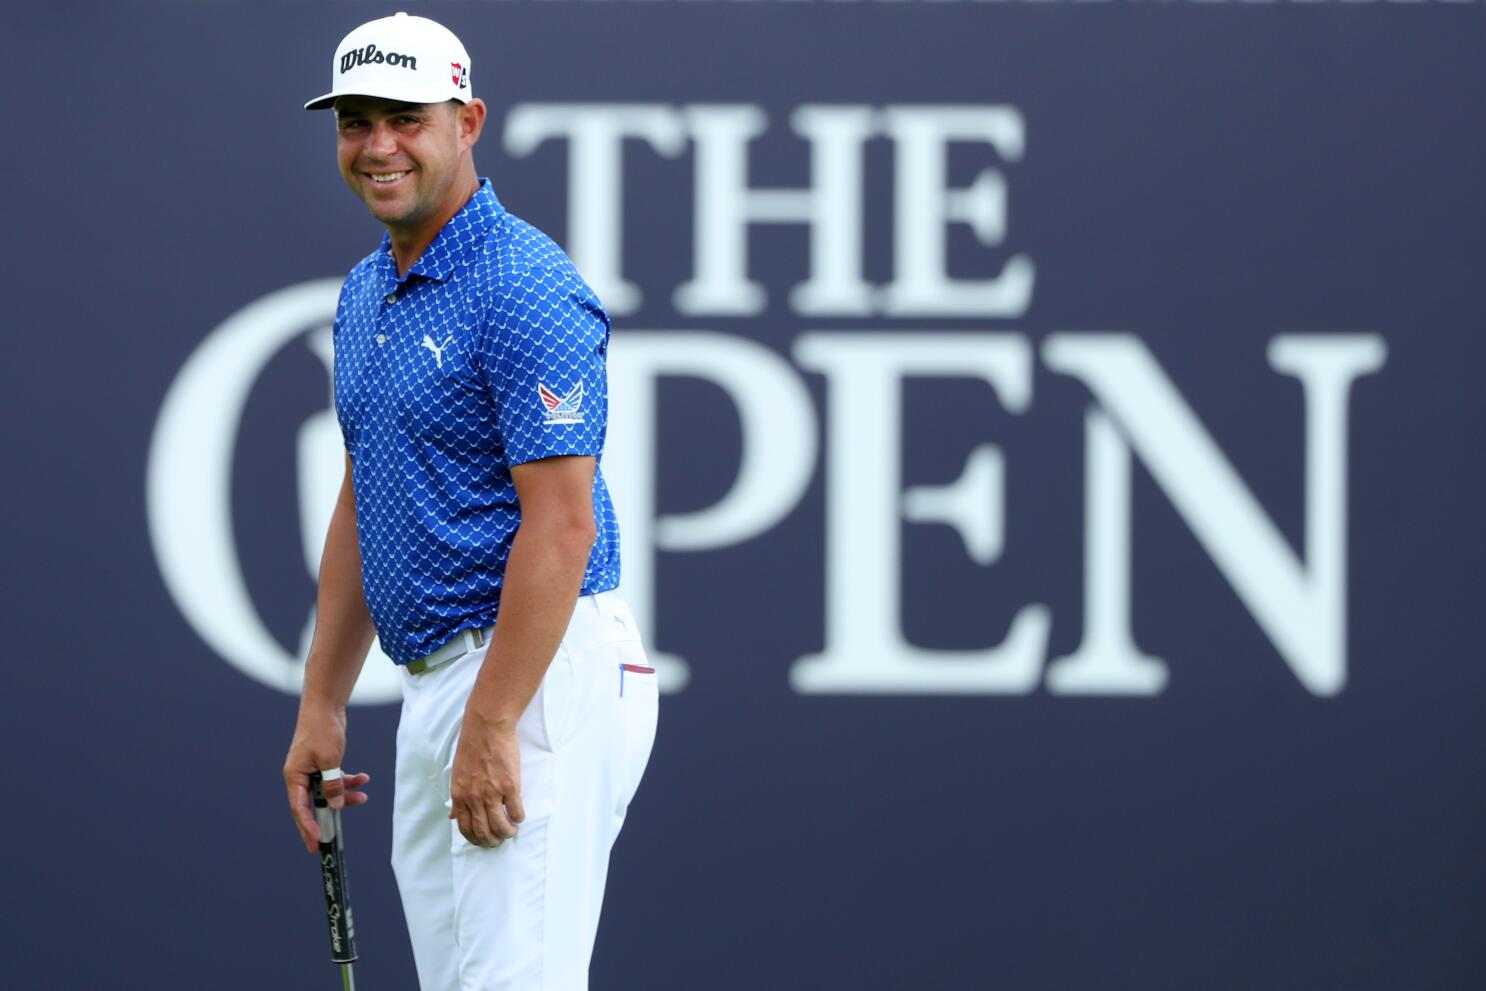 Here's how much prize money Topeka's Gary Woodland won at the Masters